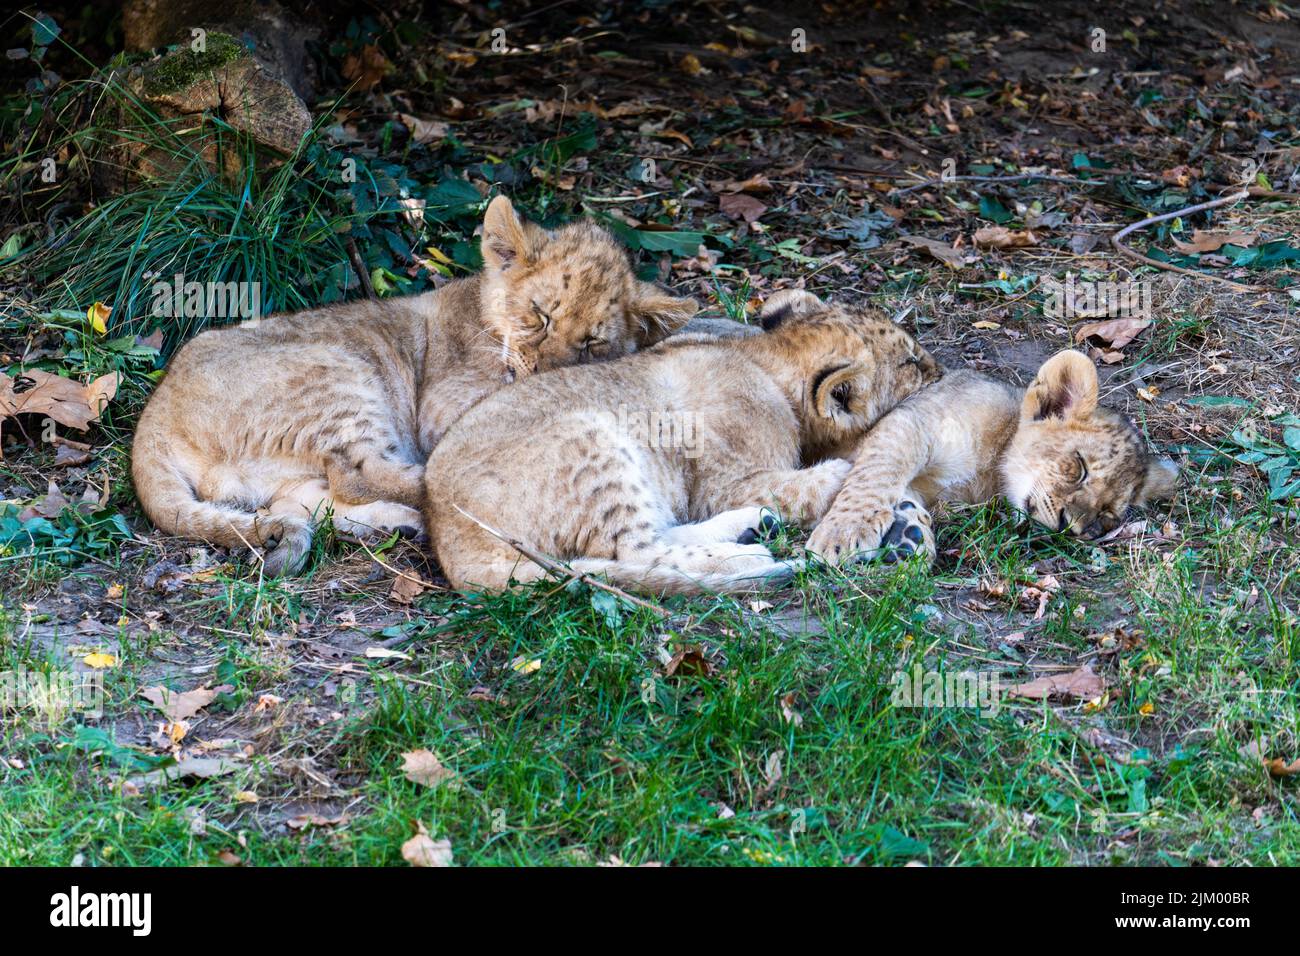 A closeup shot of 3 baby lions lying together in the grass at the Antwerp zoo,  Belgium Stock Photo